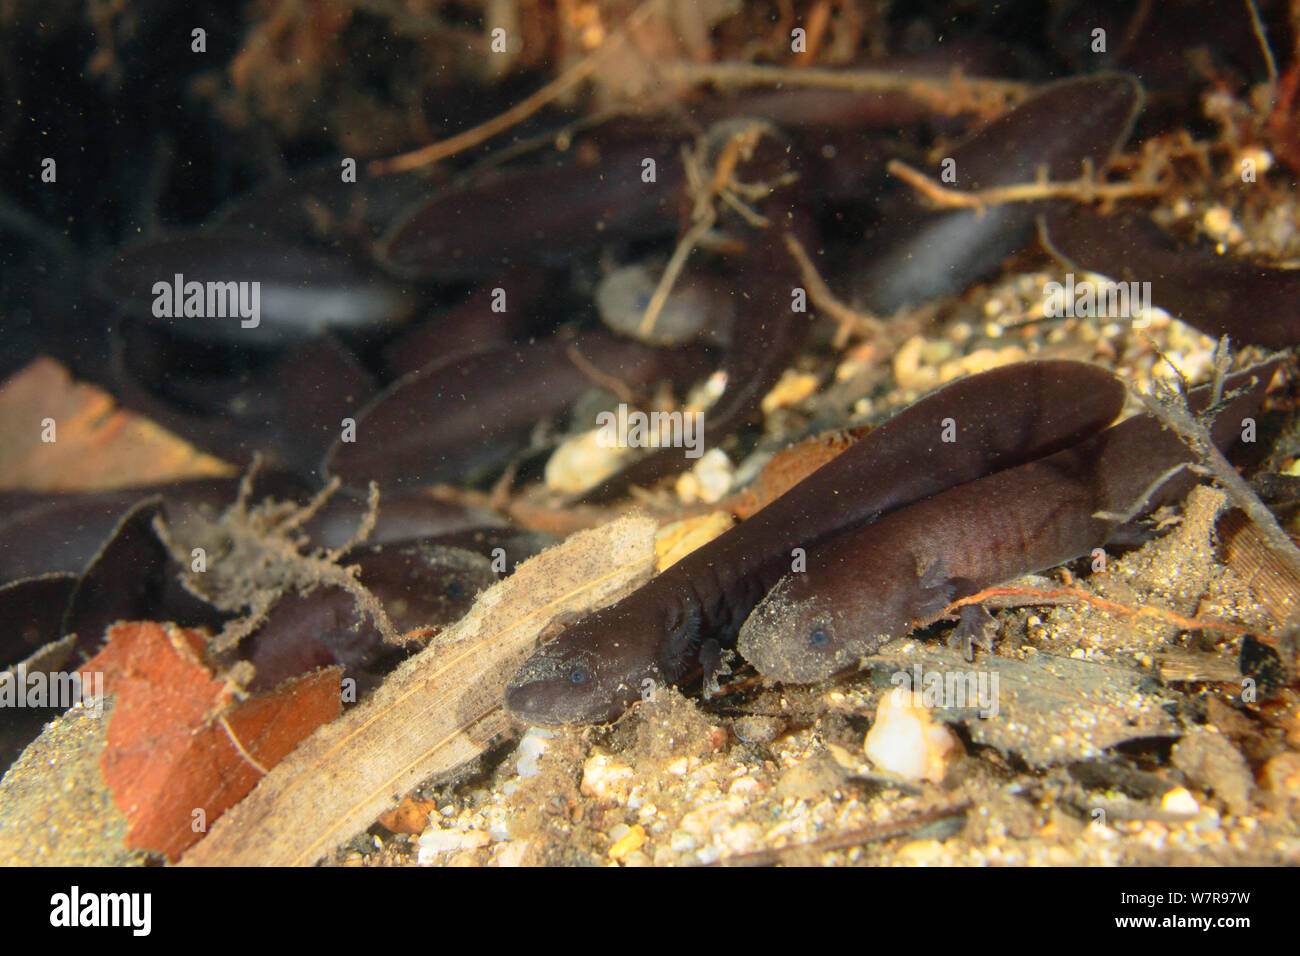 Japanese giant salamander (Andrias japonicus) larvae gathered at the entrance of the nest, Hino-river Tottori-ken Japan, March Stock Photo